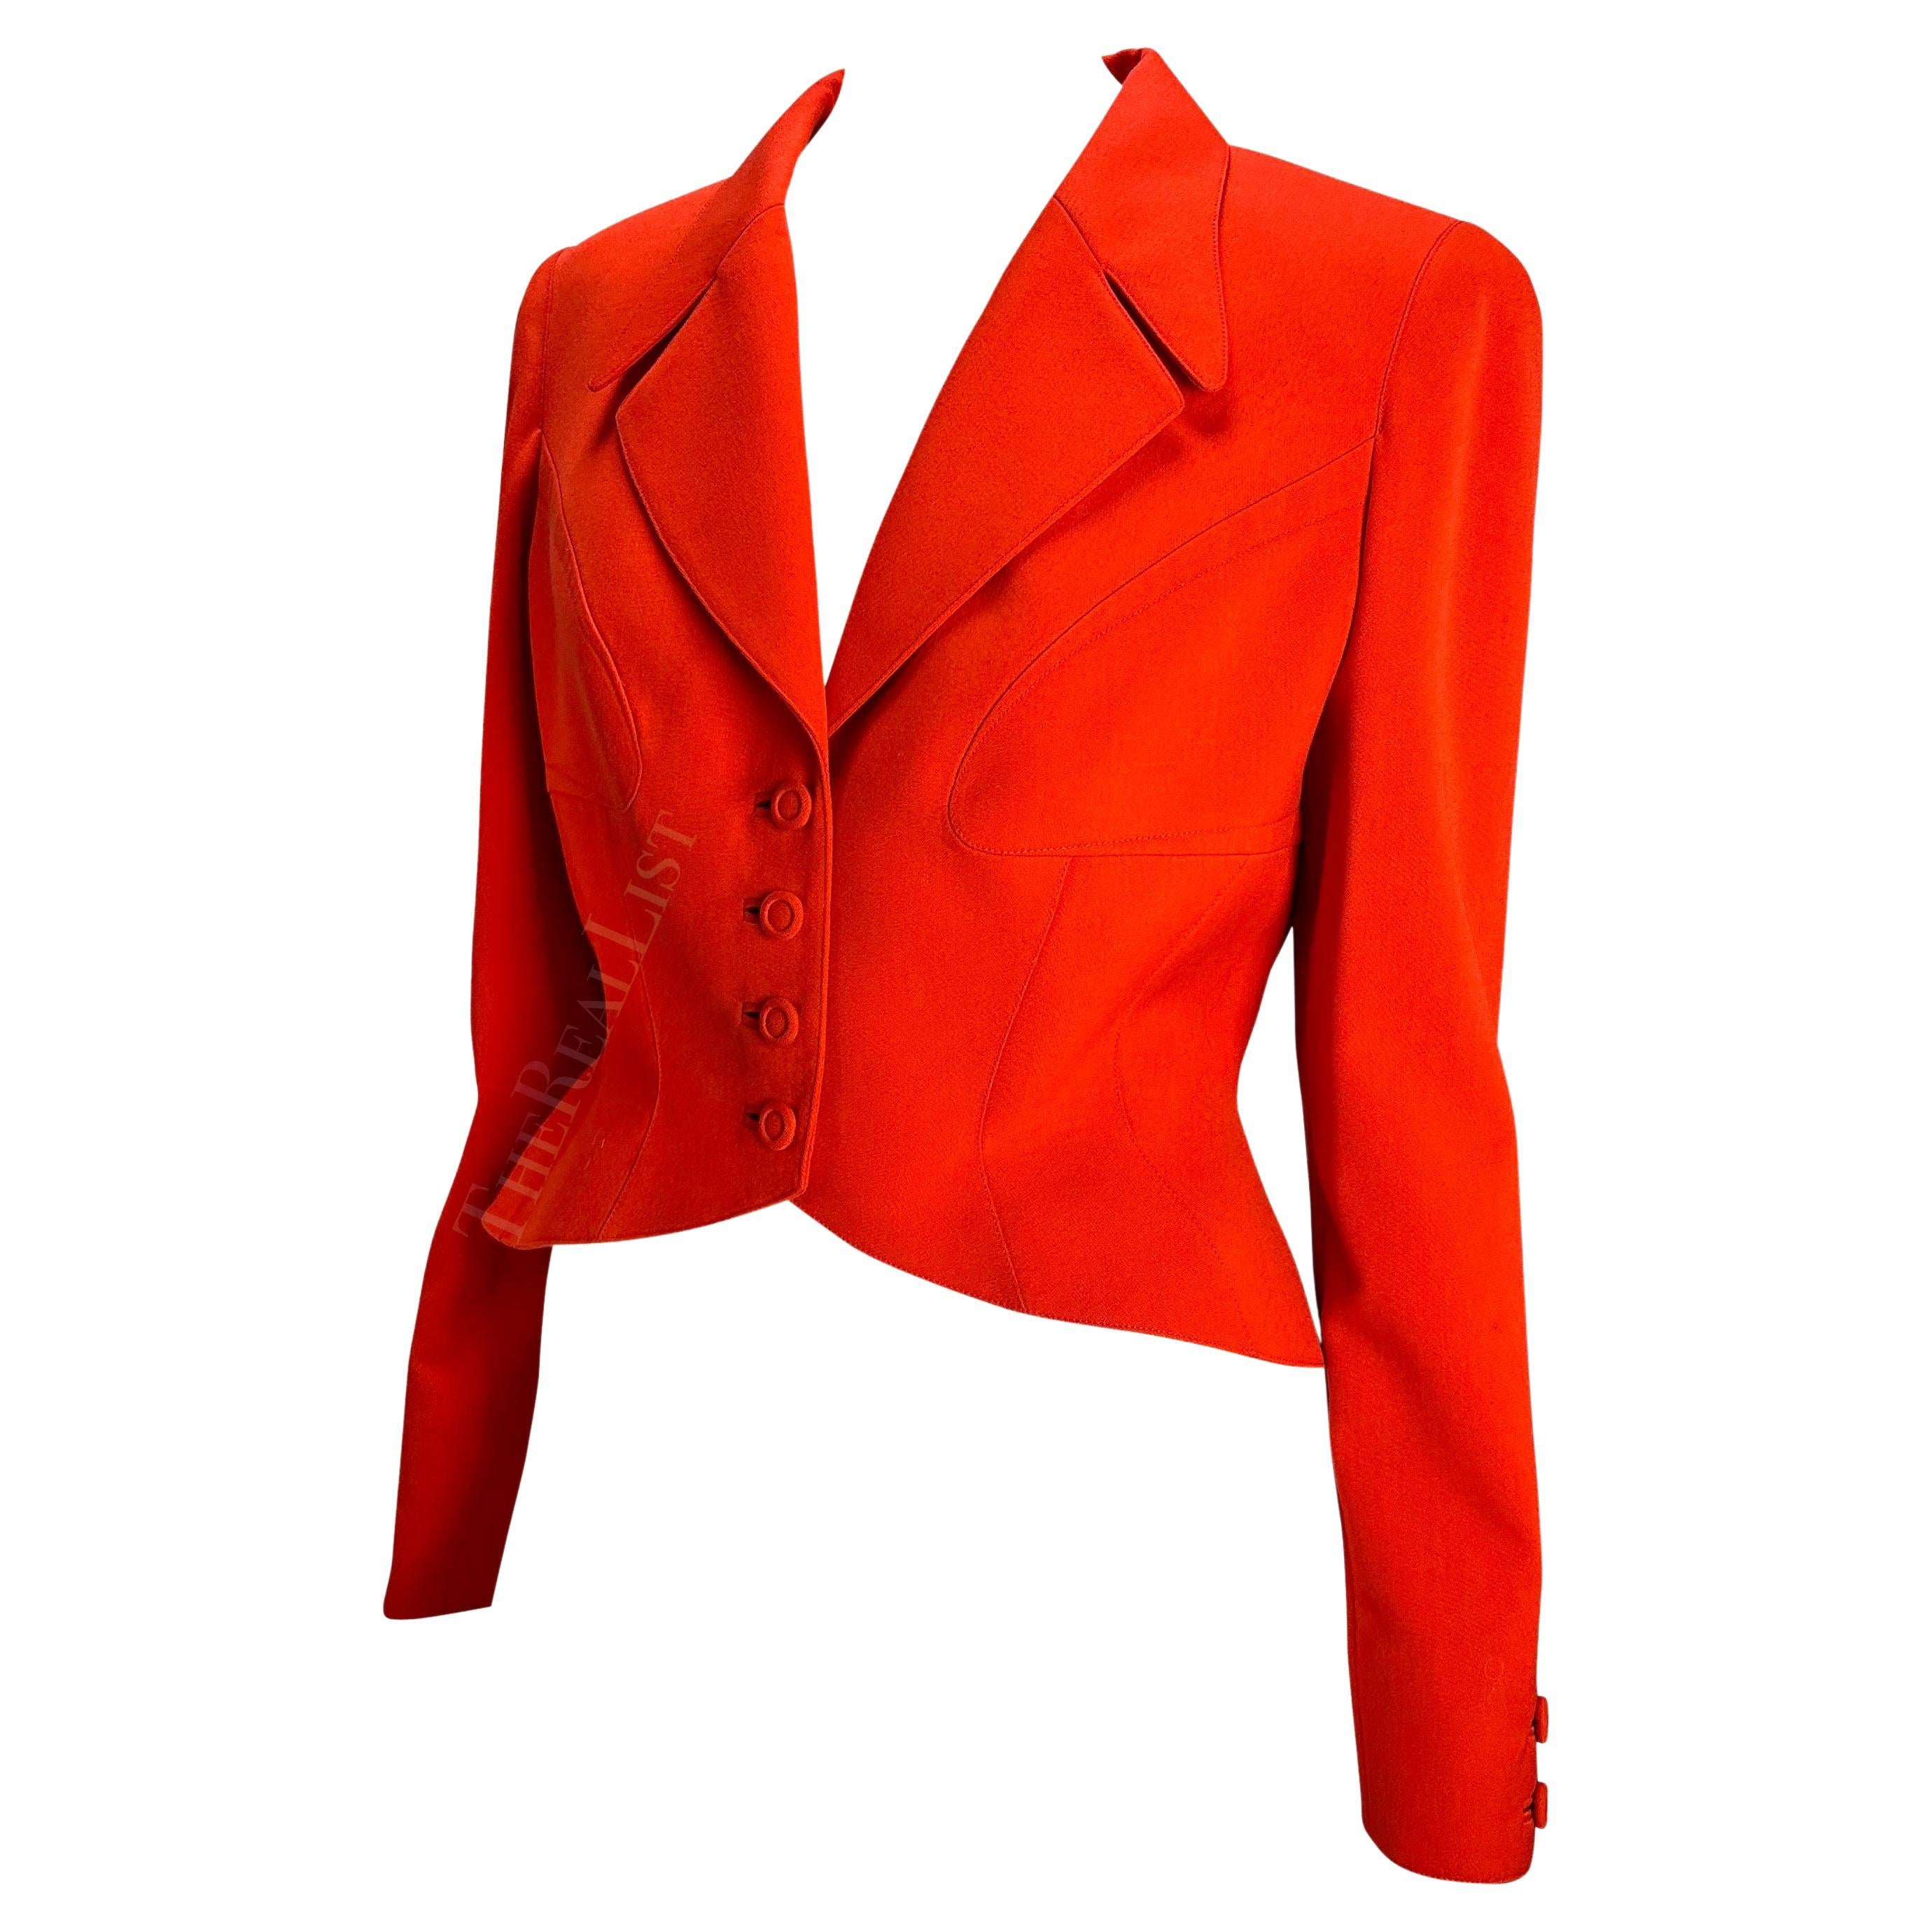 Presenting a fabulous bright orange Thierry Mugler blazer, designed by Manfred Mugler. From the 1980s, this jacket features masterful craftsmanship and design. Mugler was known for his exaggerated silhouettes with this jacket being no exception.